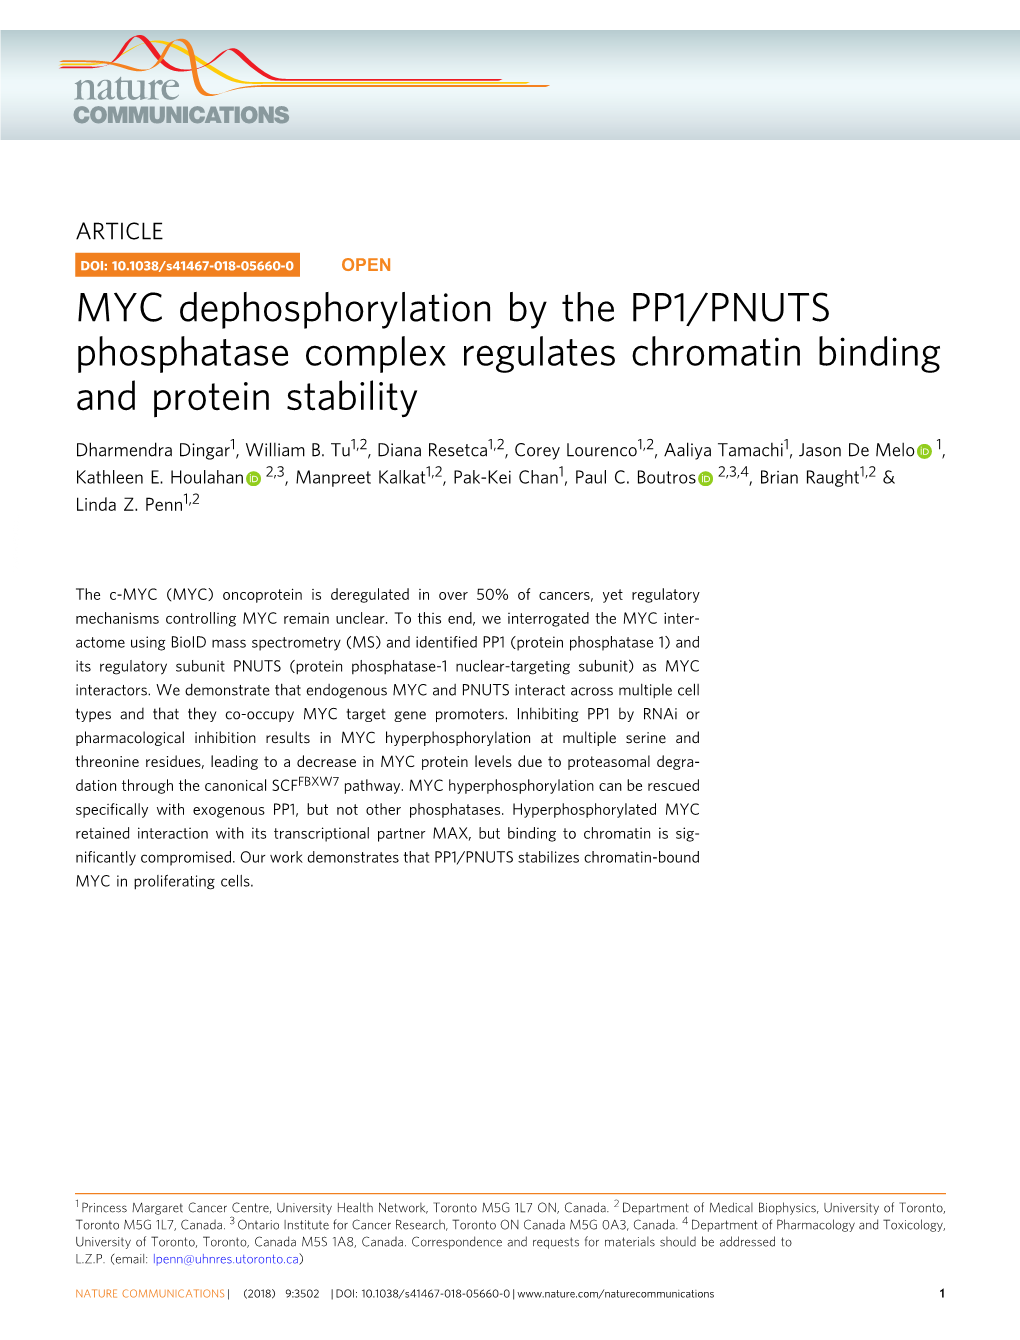 MYC Dephosphorylation by the PP1/PNUTS Phosphatase Complex Regulates Chromatin Binding and Protein Stability